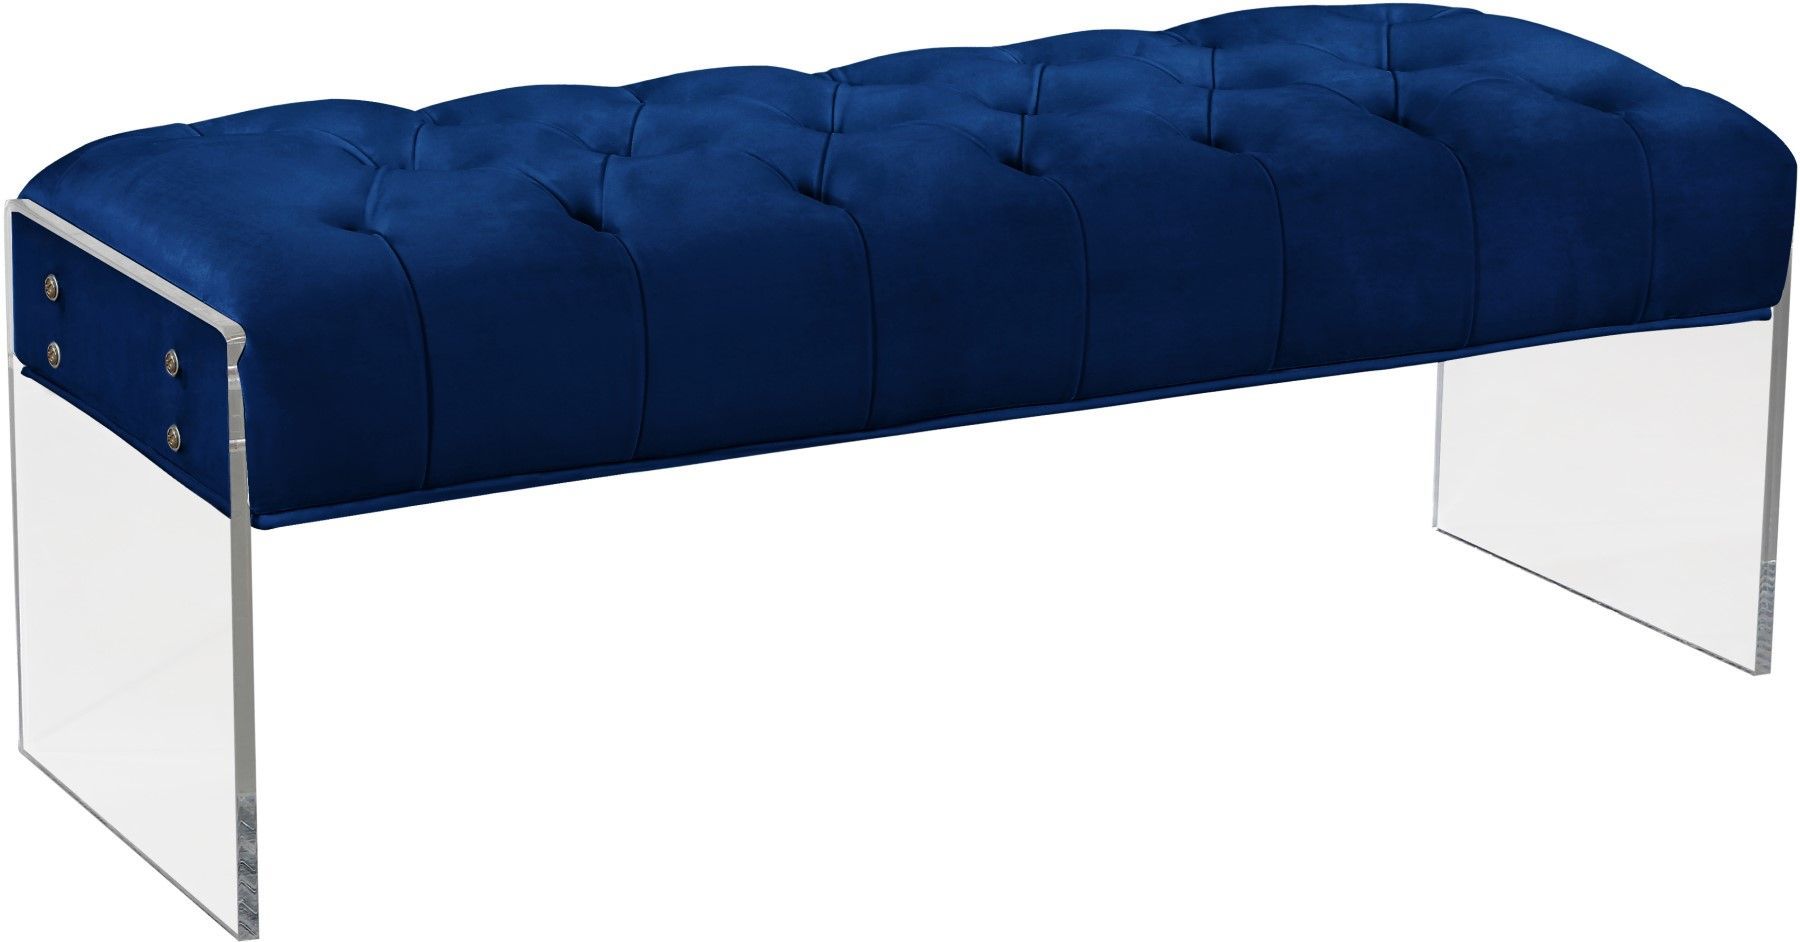 Zoey Contemporary Navy Button Tufted Velvet Bench With Acrylic Base Pertaining To Navy Velvet Fabric Benches (View 7 of 20)